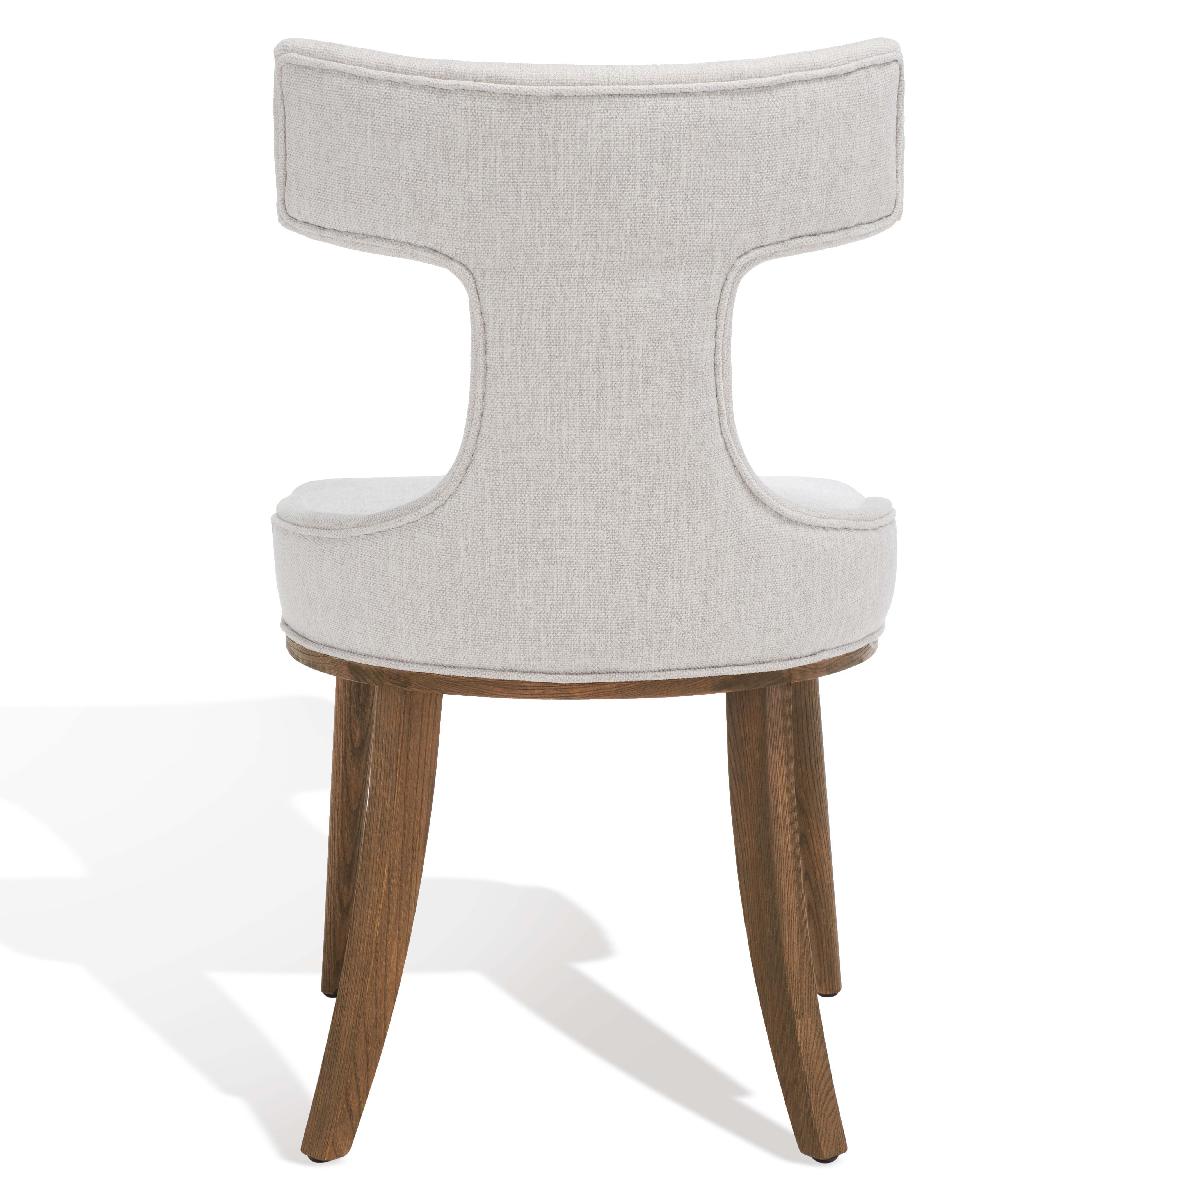 Safavieh Couture Krisalyn Linen Dining Chair , SFV5028